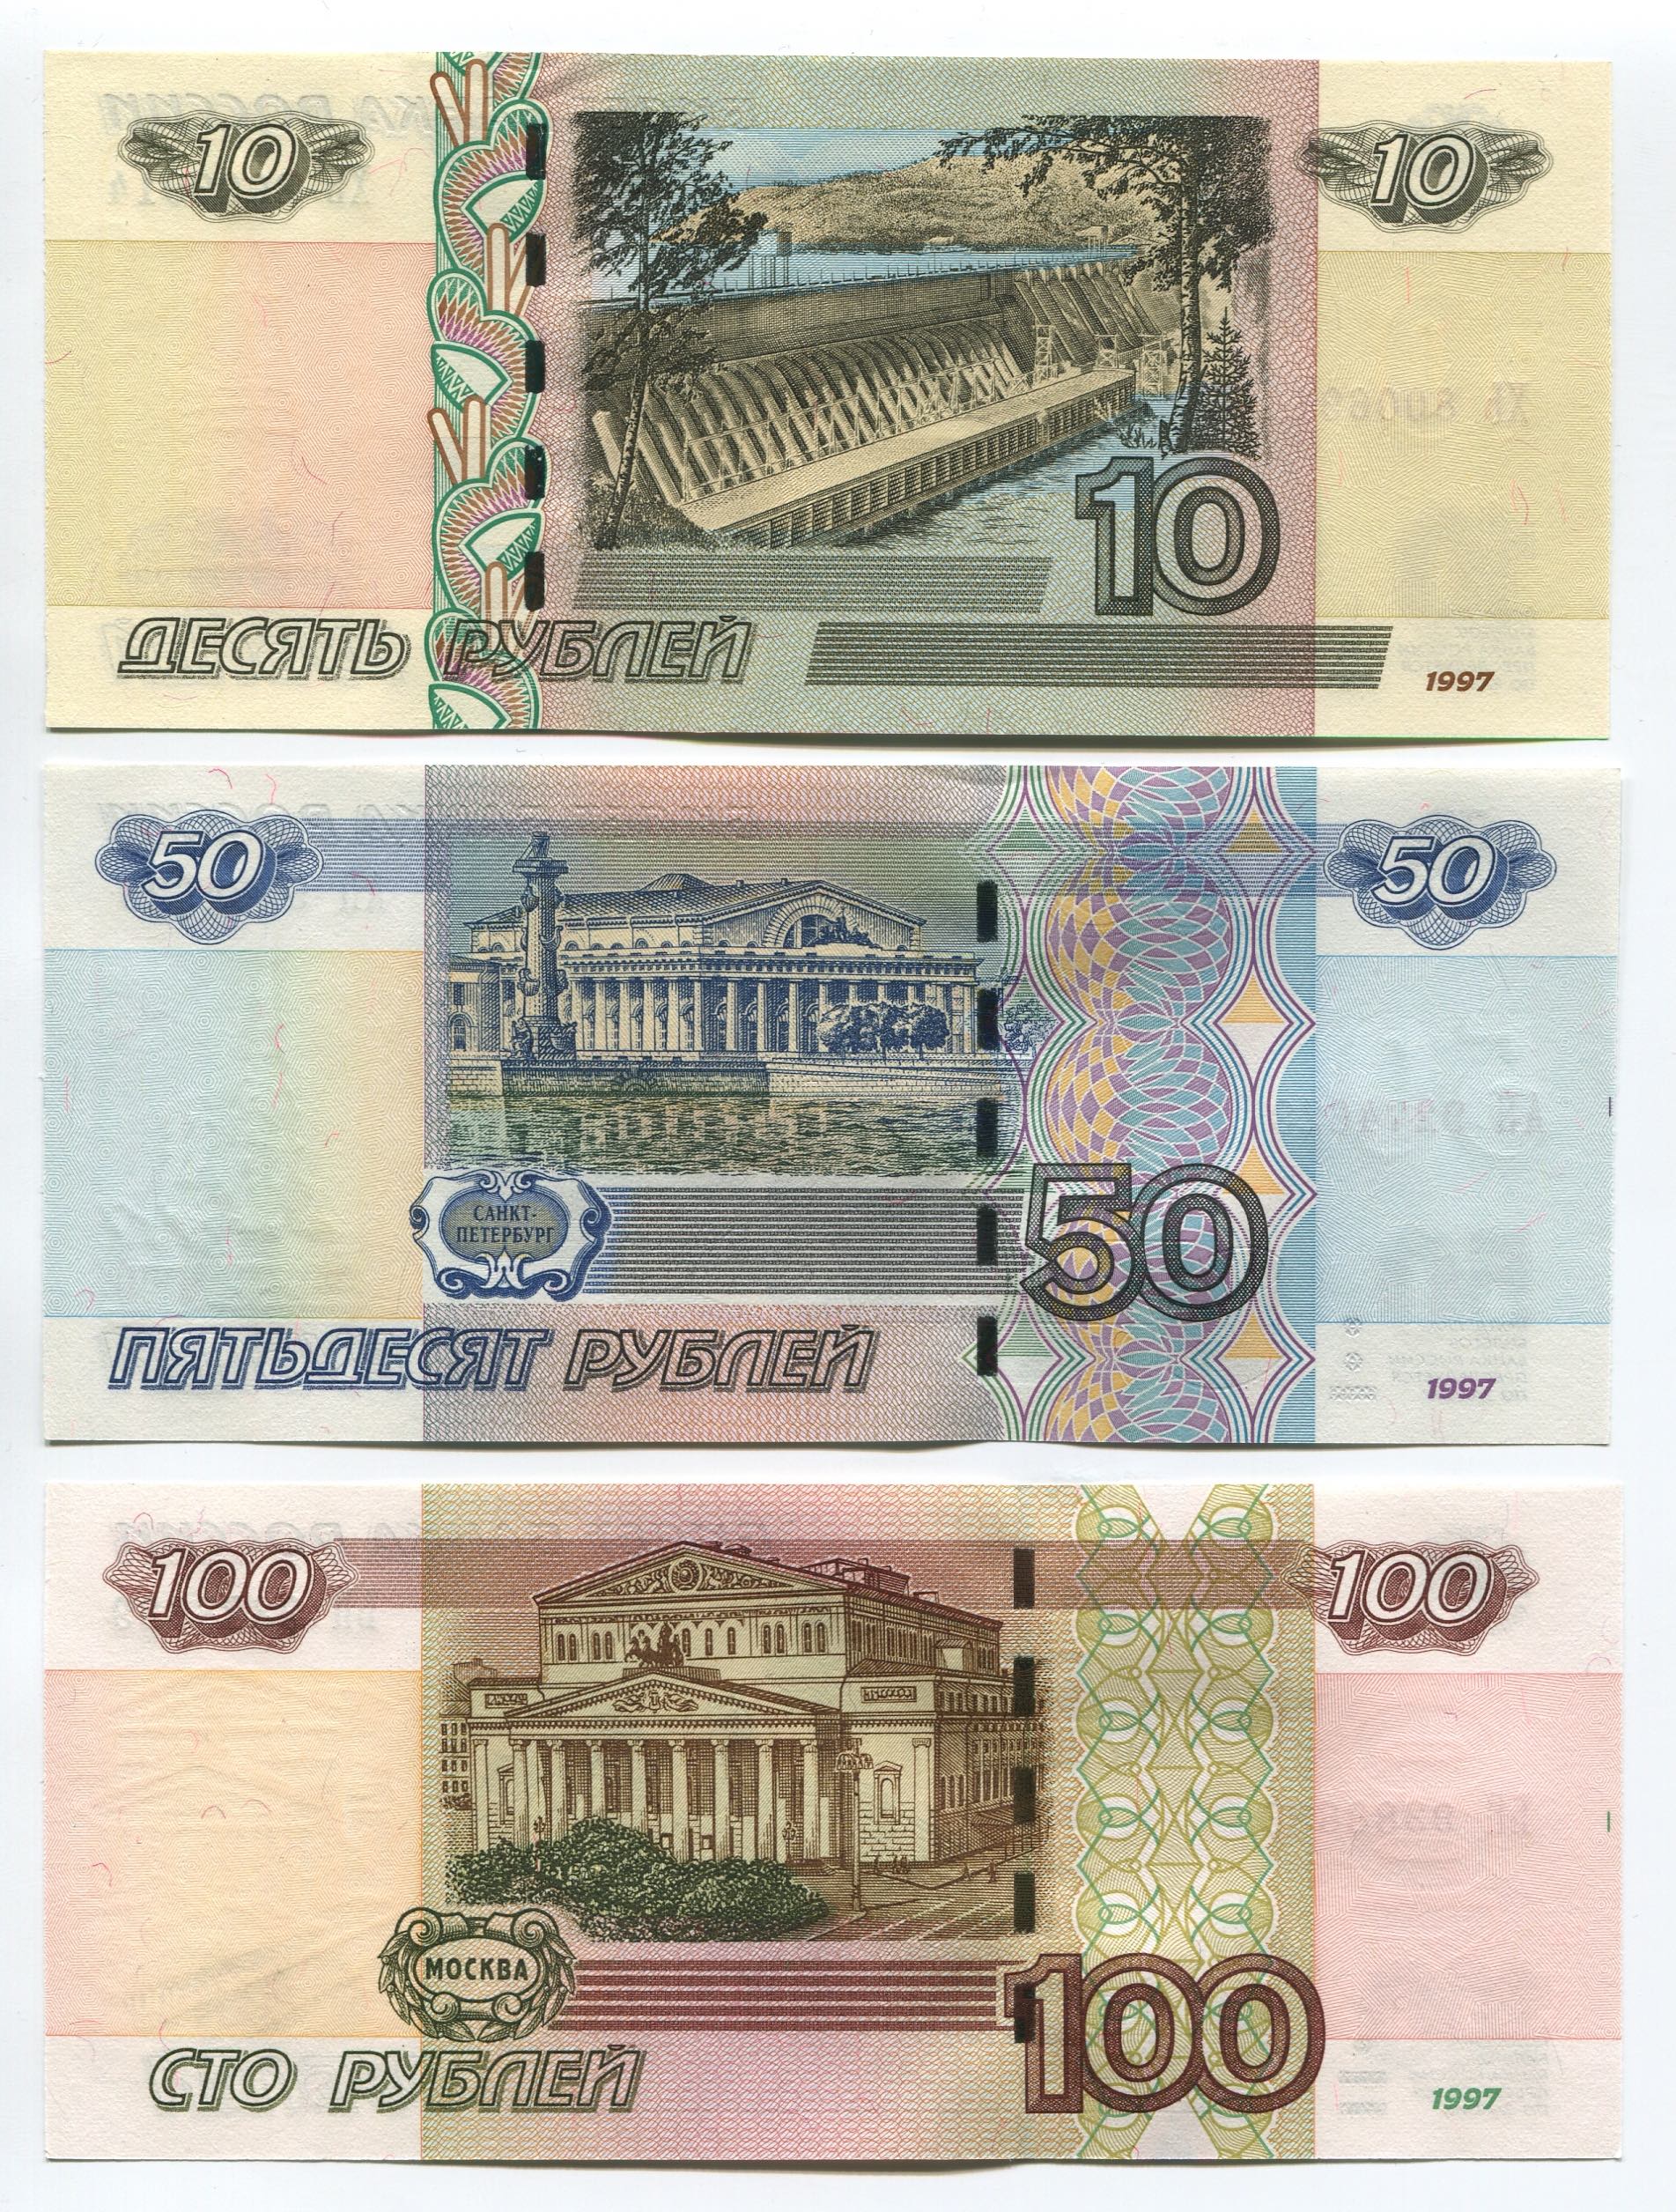 Russian Federation 10-50-100 Roubles 2004